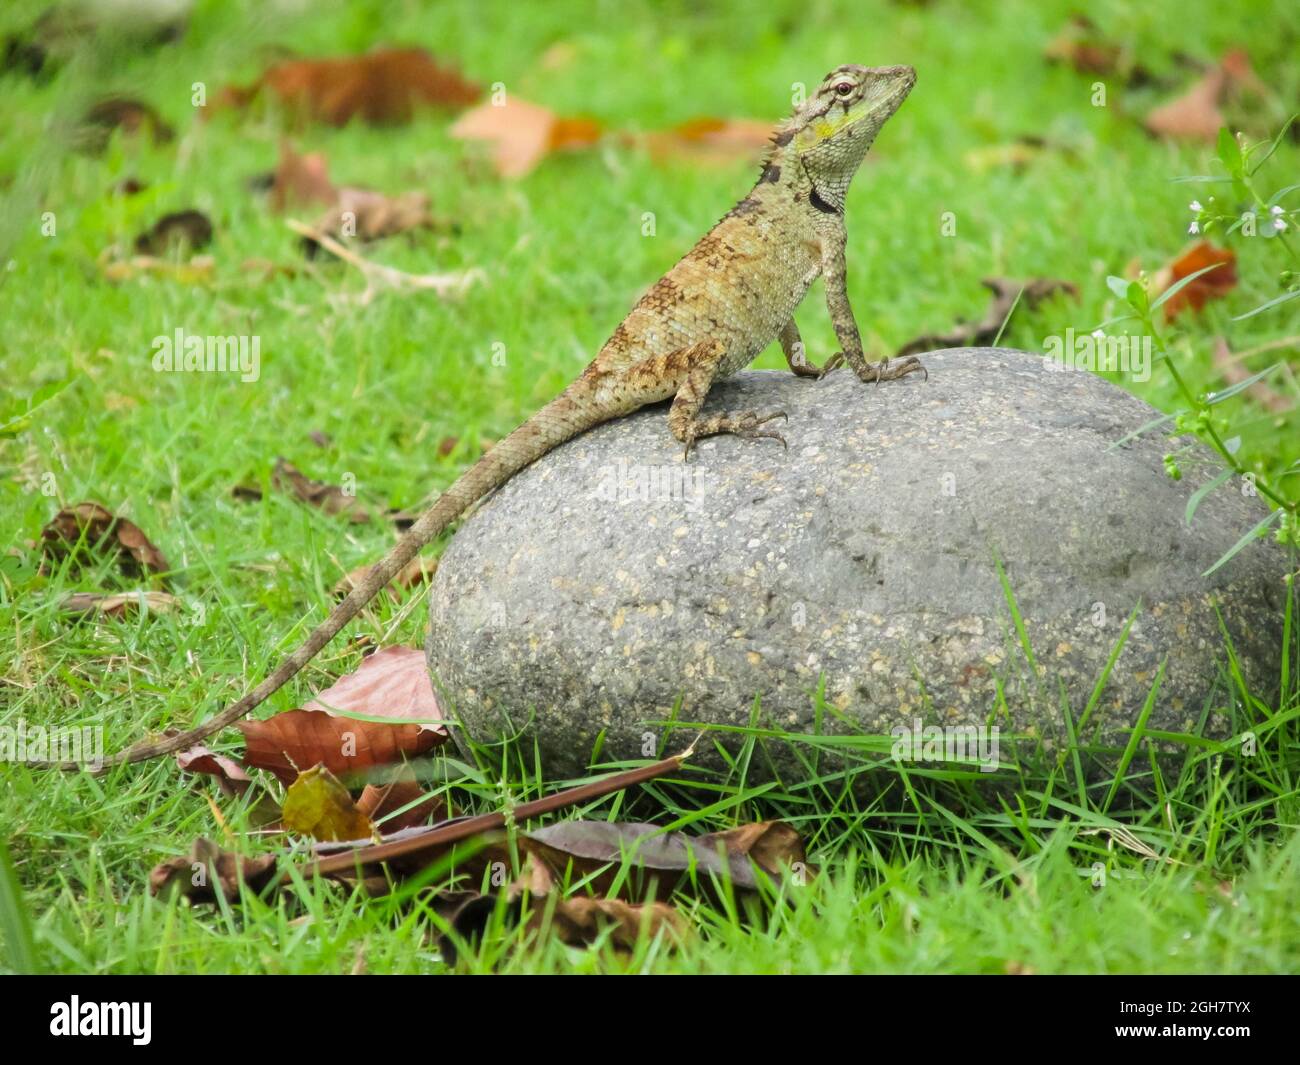 Close-up of a lizard on a rock Stock Photo